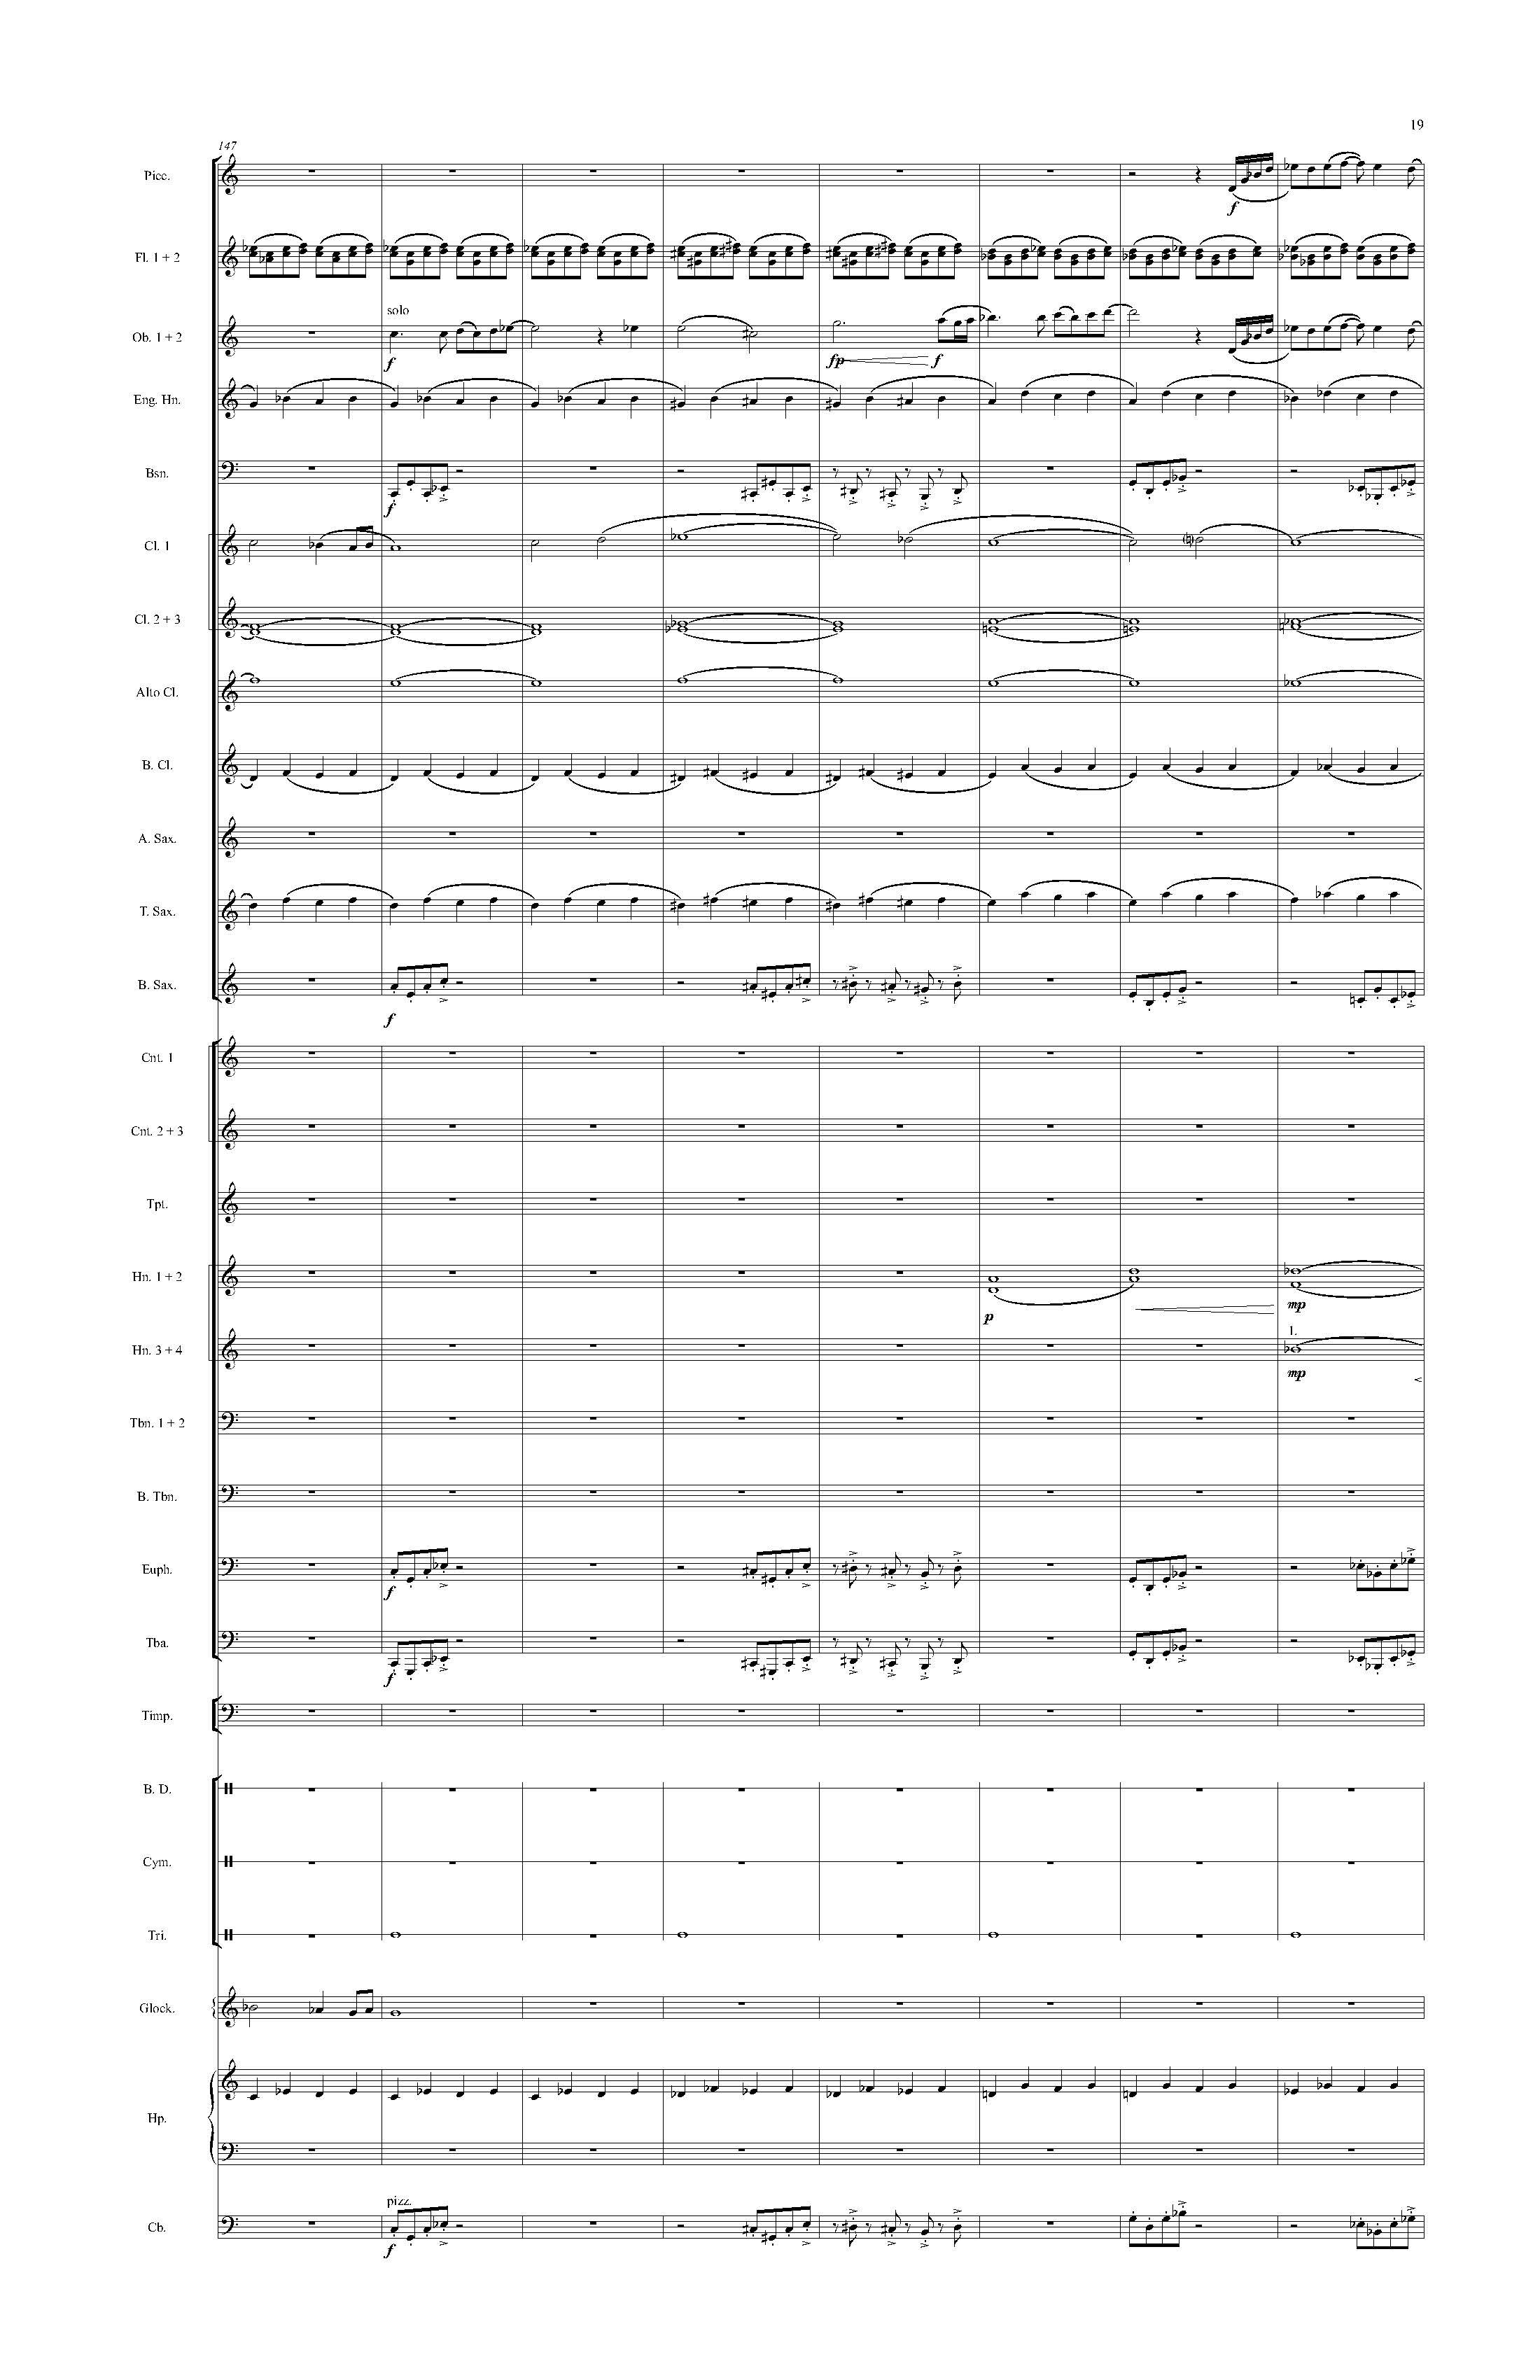 Psyche - Complete Score_Page_25.jpg